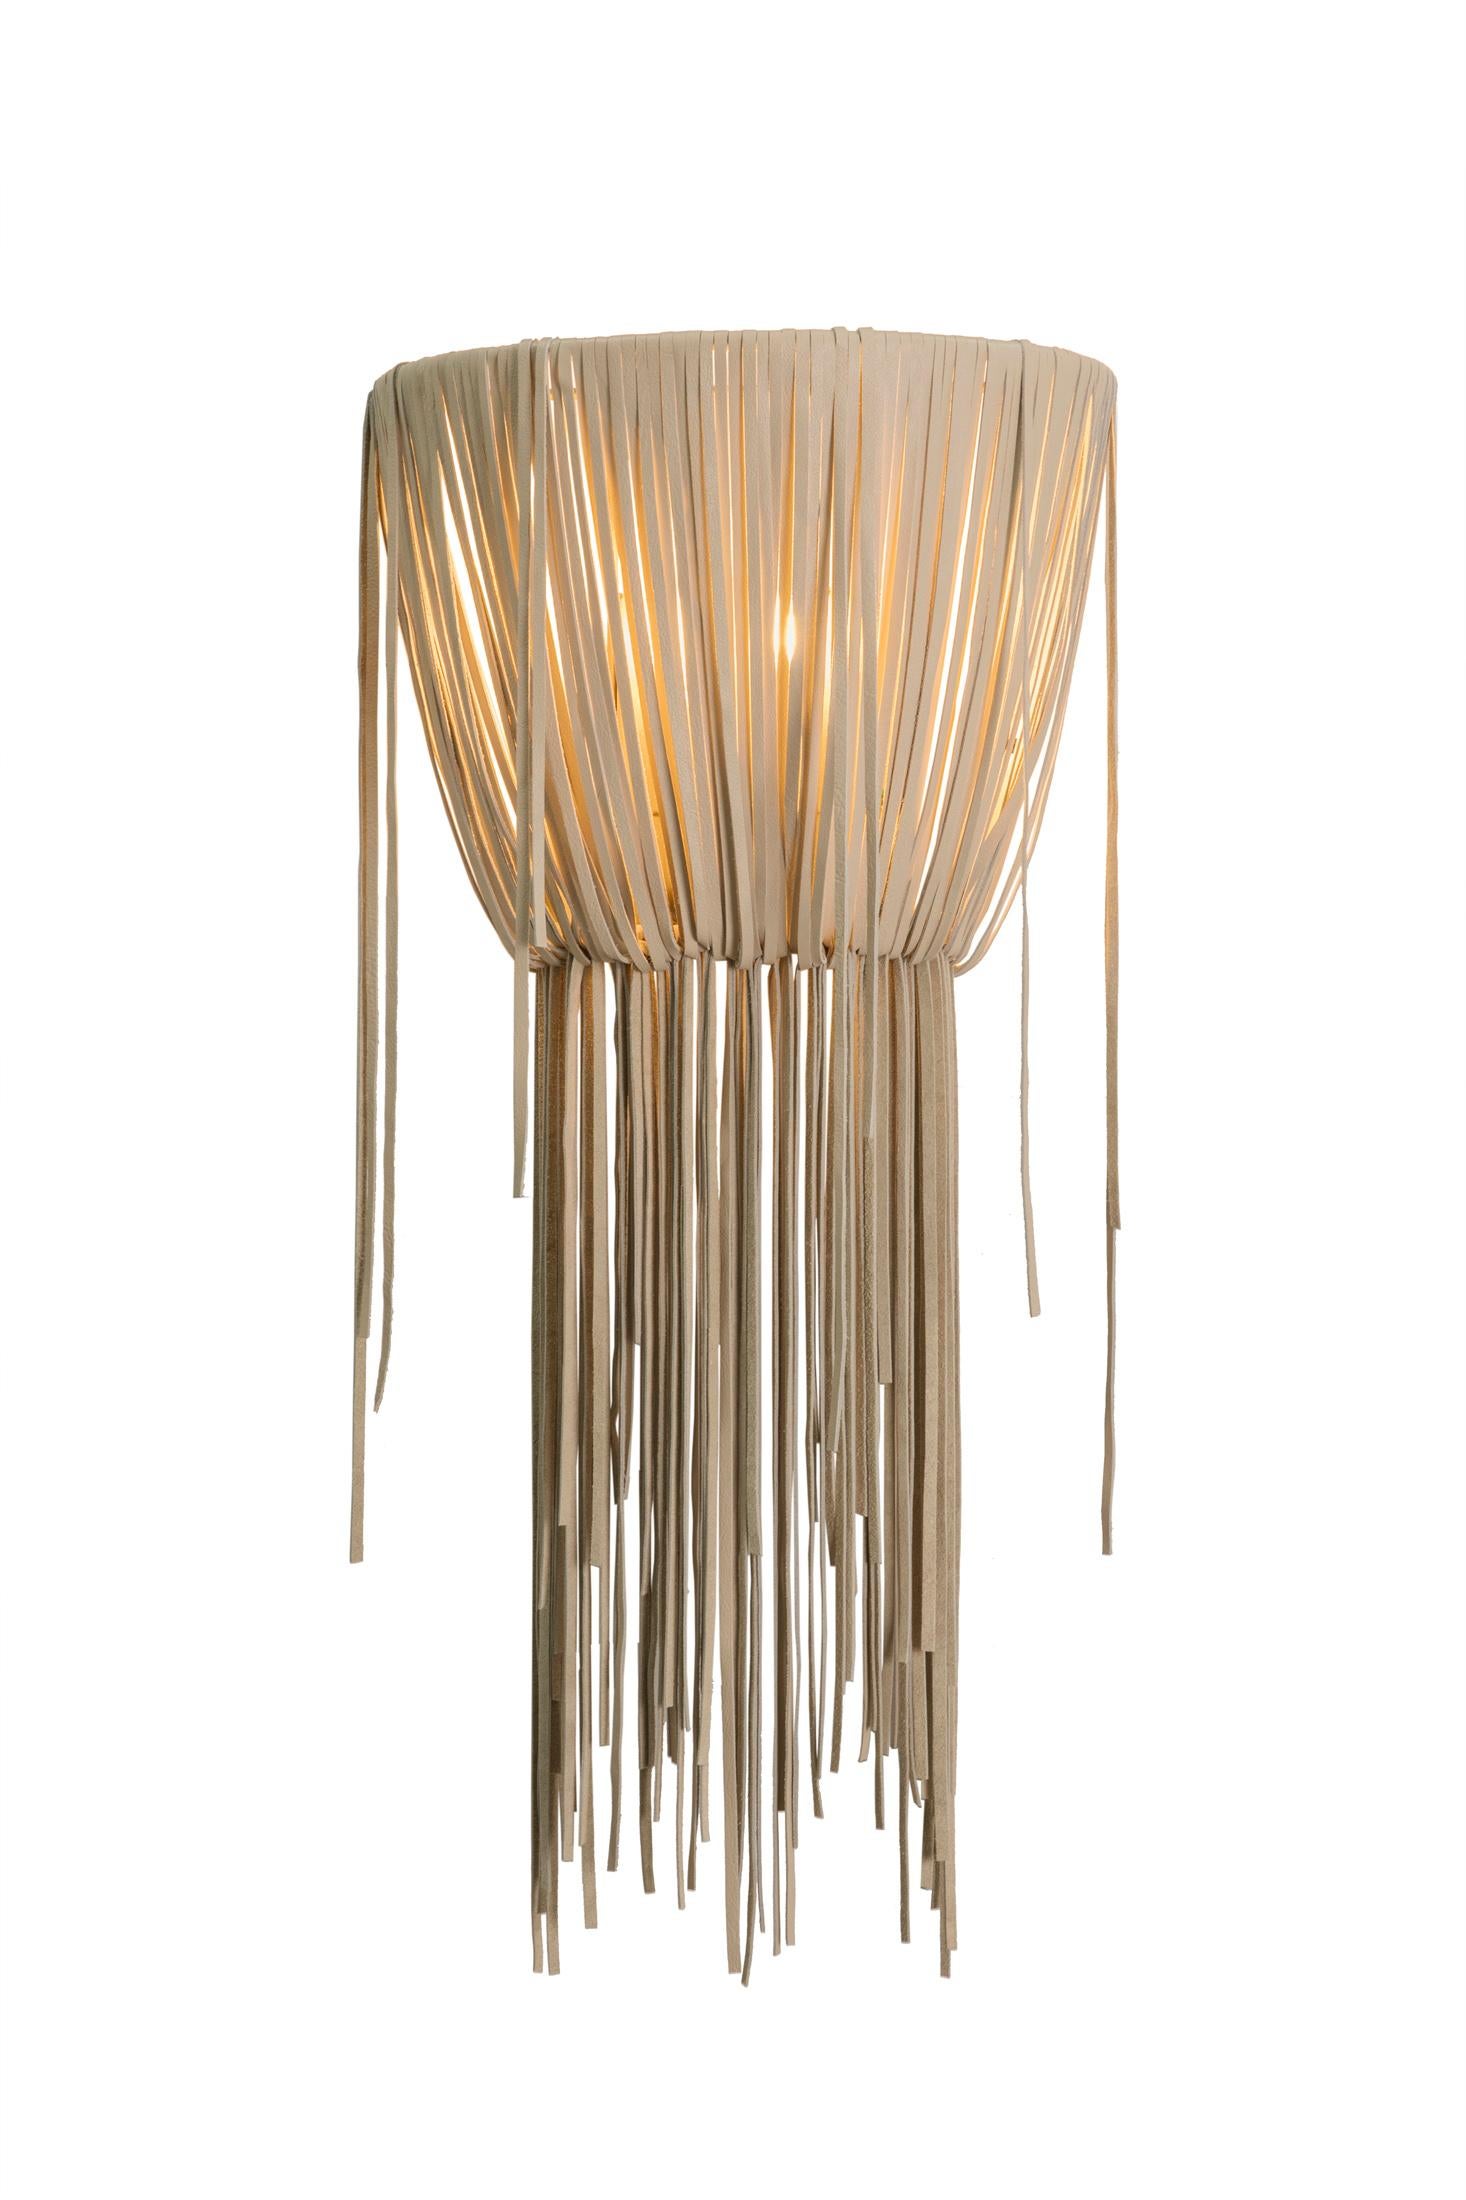 Our Urchin wall sconce features an elegant pattern of hand-cut leather strips. All hard-wired lighting is UL-listed for dry locations. Not suitable for outdoor use.

PRODUCT INFORMATION
DIMENSIONS: 15